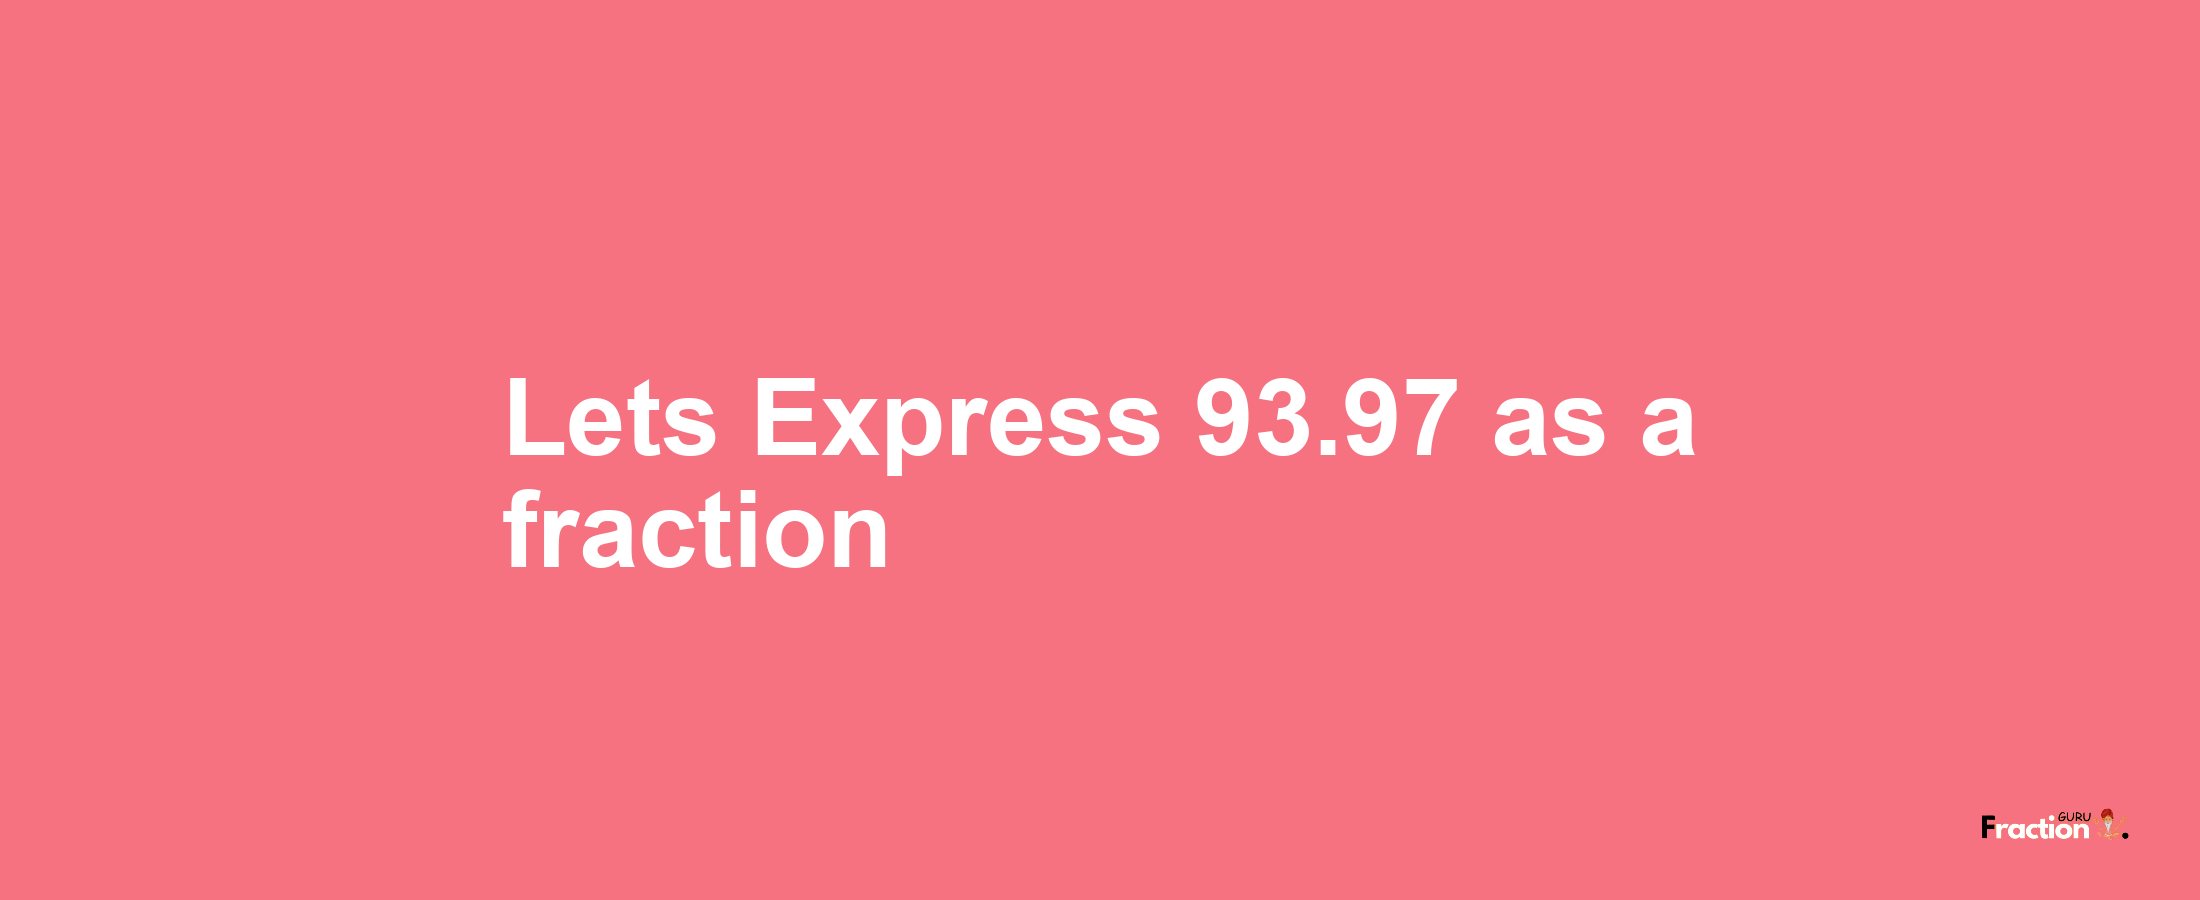 Lets Express 93.97 as afraction